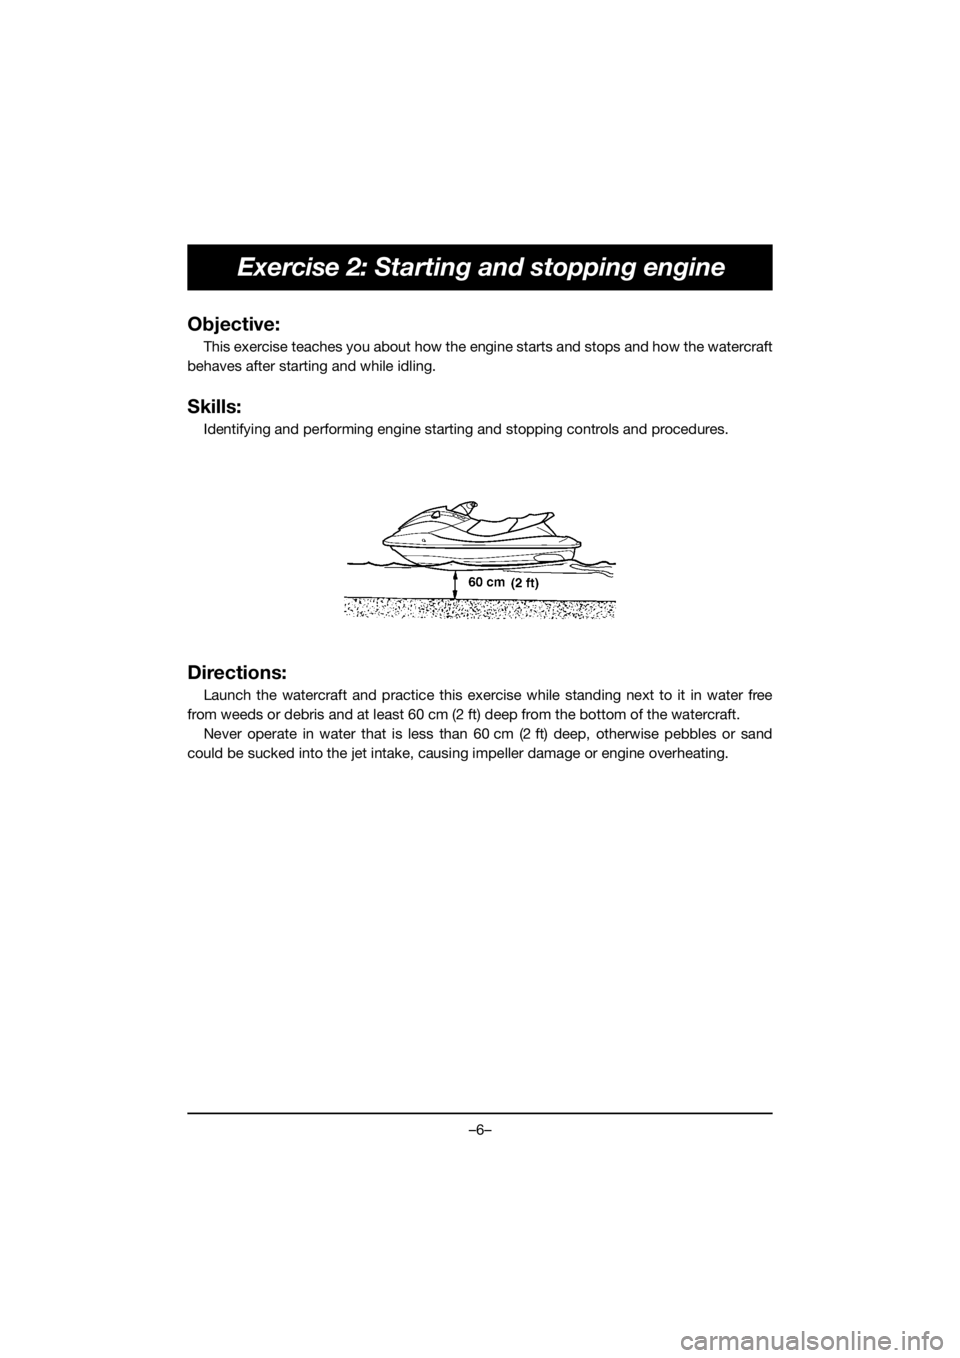 YAMAHA FX HO 2019  Manuale de Empleo (in Spanish) –6–
Exercise 2: Starting and stopping engine
Objective:
This exercise teaches you about how the engine starts and stops and how the watercraft
behaves after starting and while idling.
Skills:
Iden